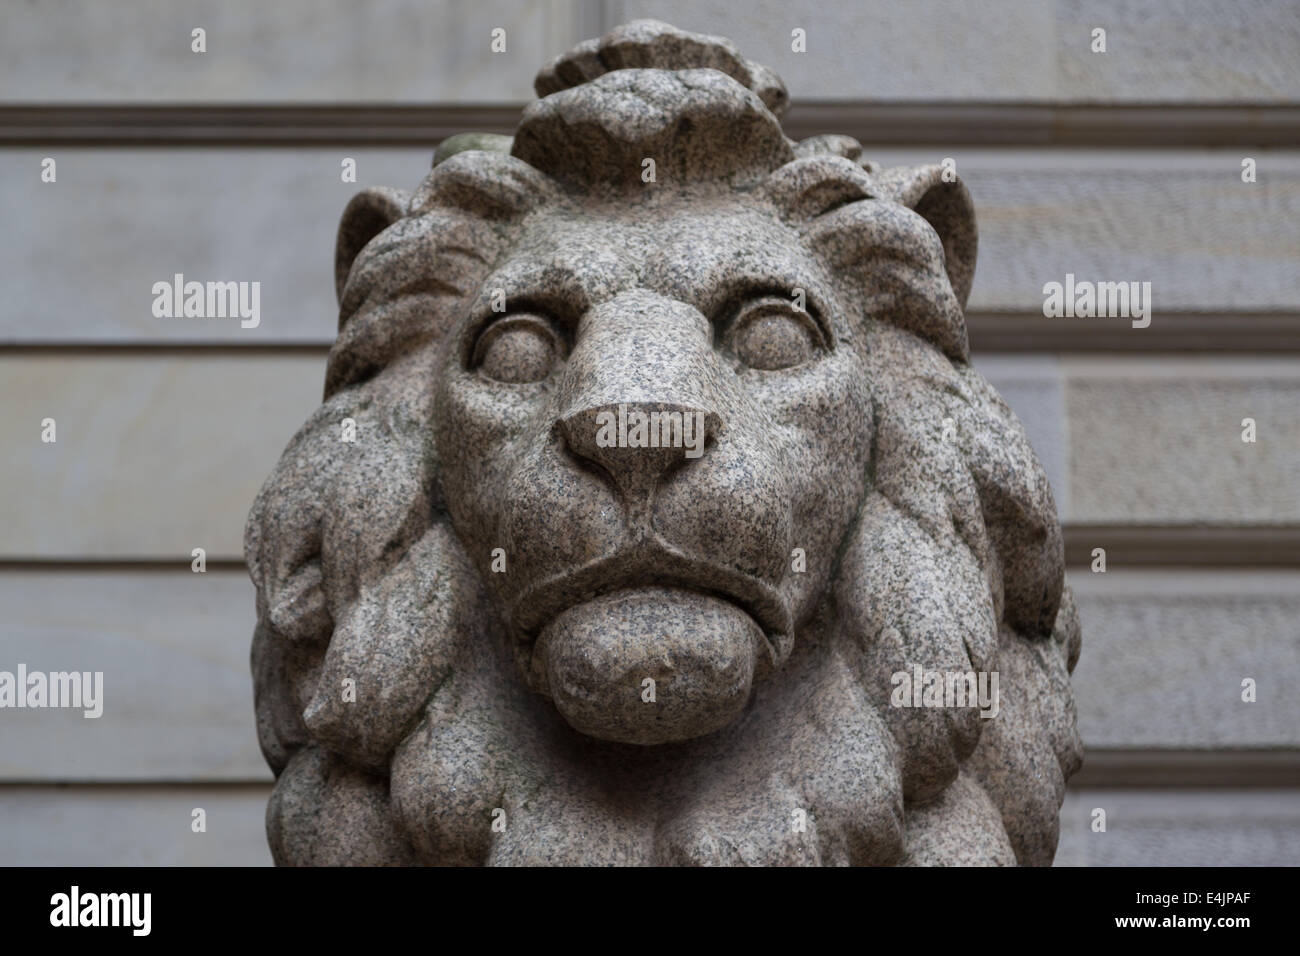 A close up photograph of a lion statue outside the Town Hall (Rathaus) in Hamburg. Stock Photo